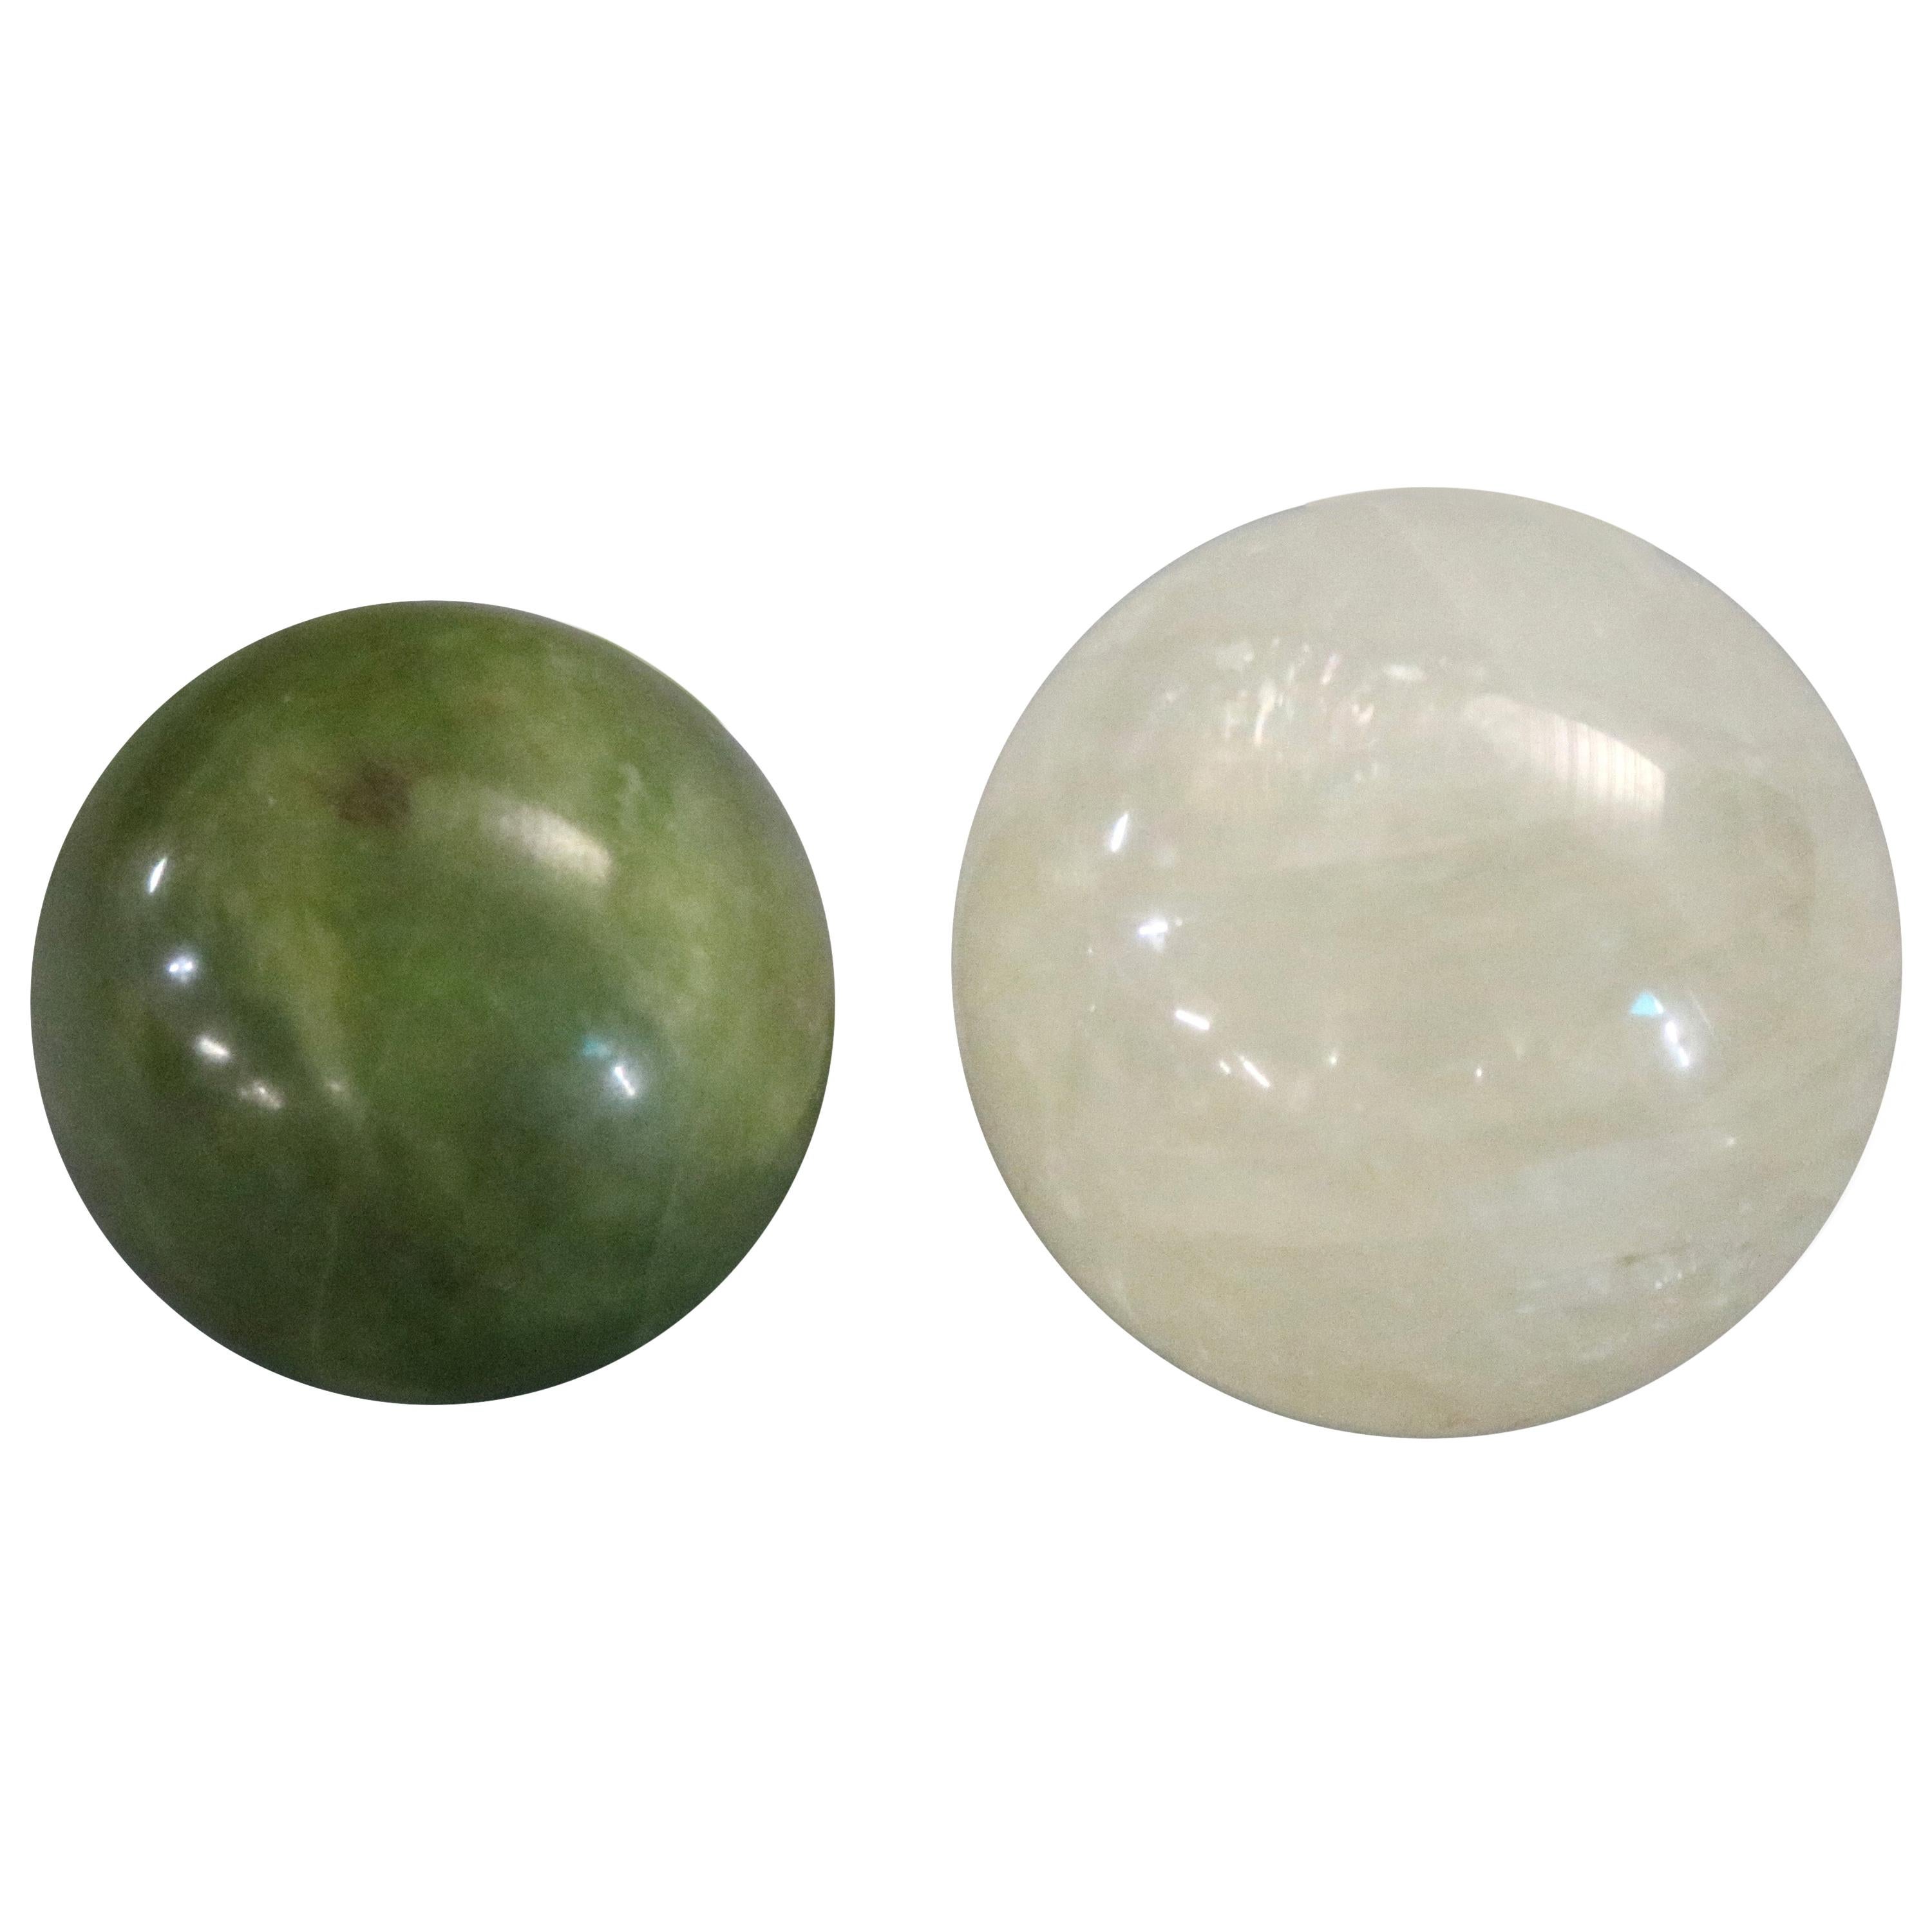 Set of Two Chinese Jade Green and White Onyx Balls, 20th Century